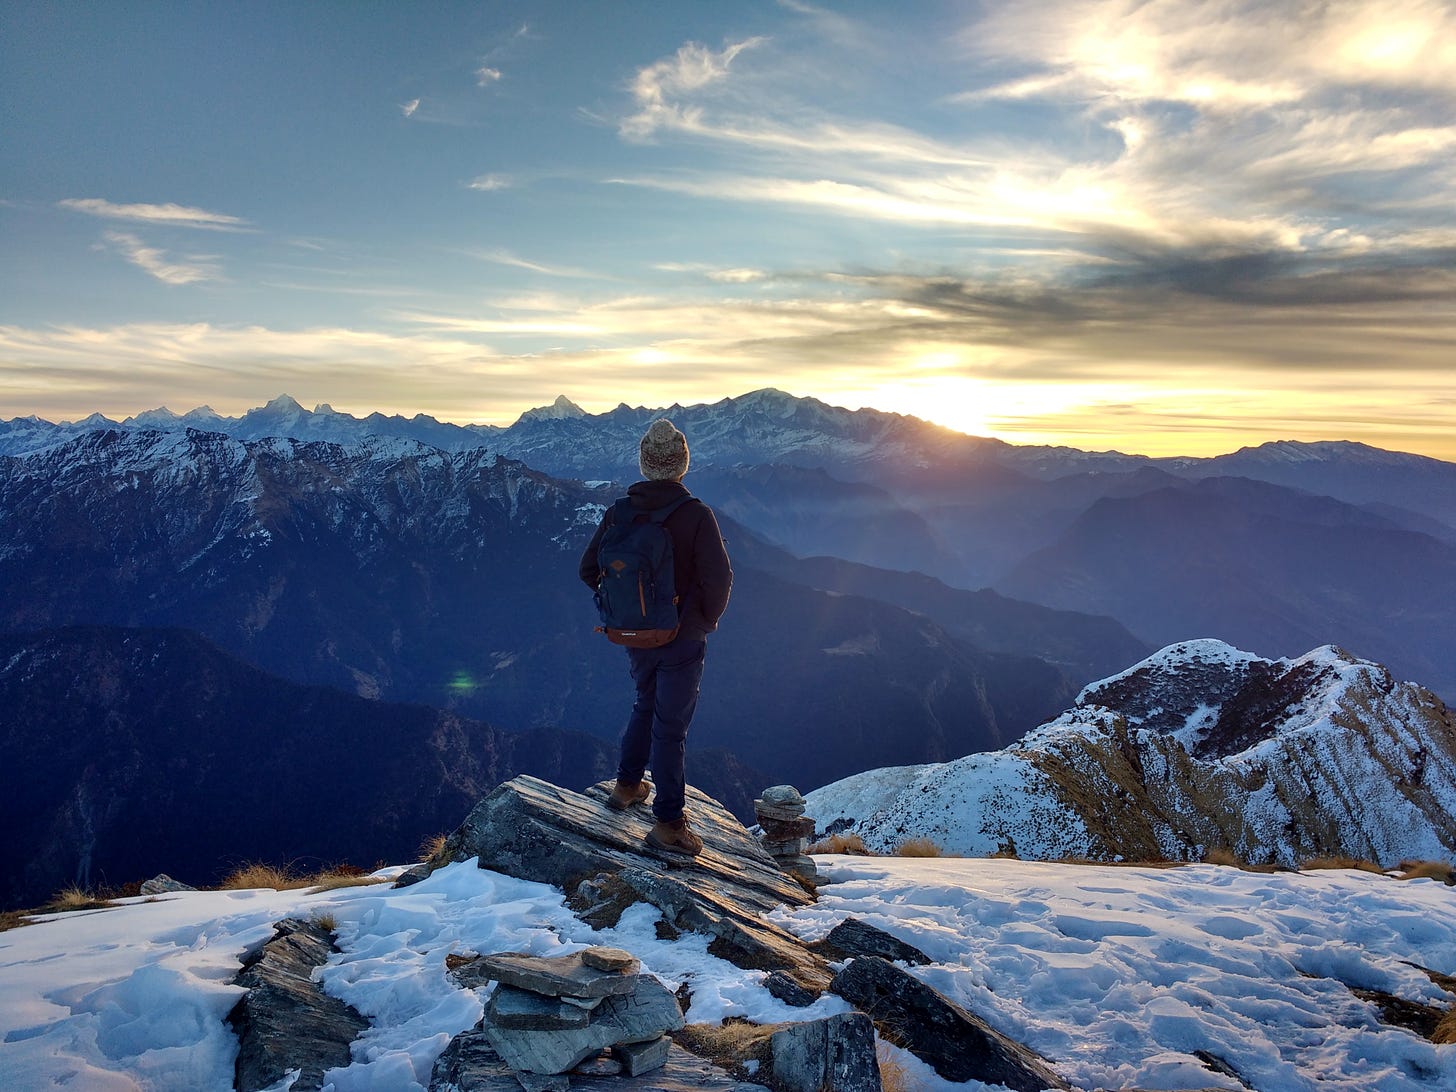 A person standing on a rock overlooking a snowy mountain range at sunrise. The person is waering a white knit hat, a black jacket and black pants with brown boots. They are also wearing a blue backpack.